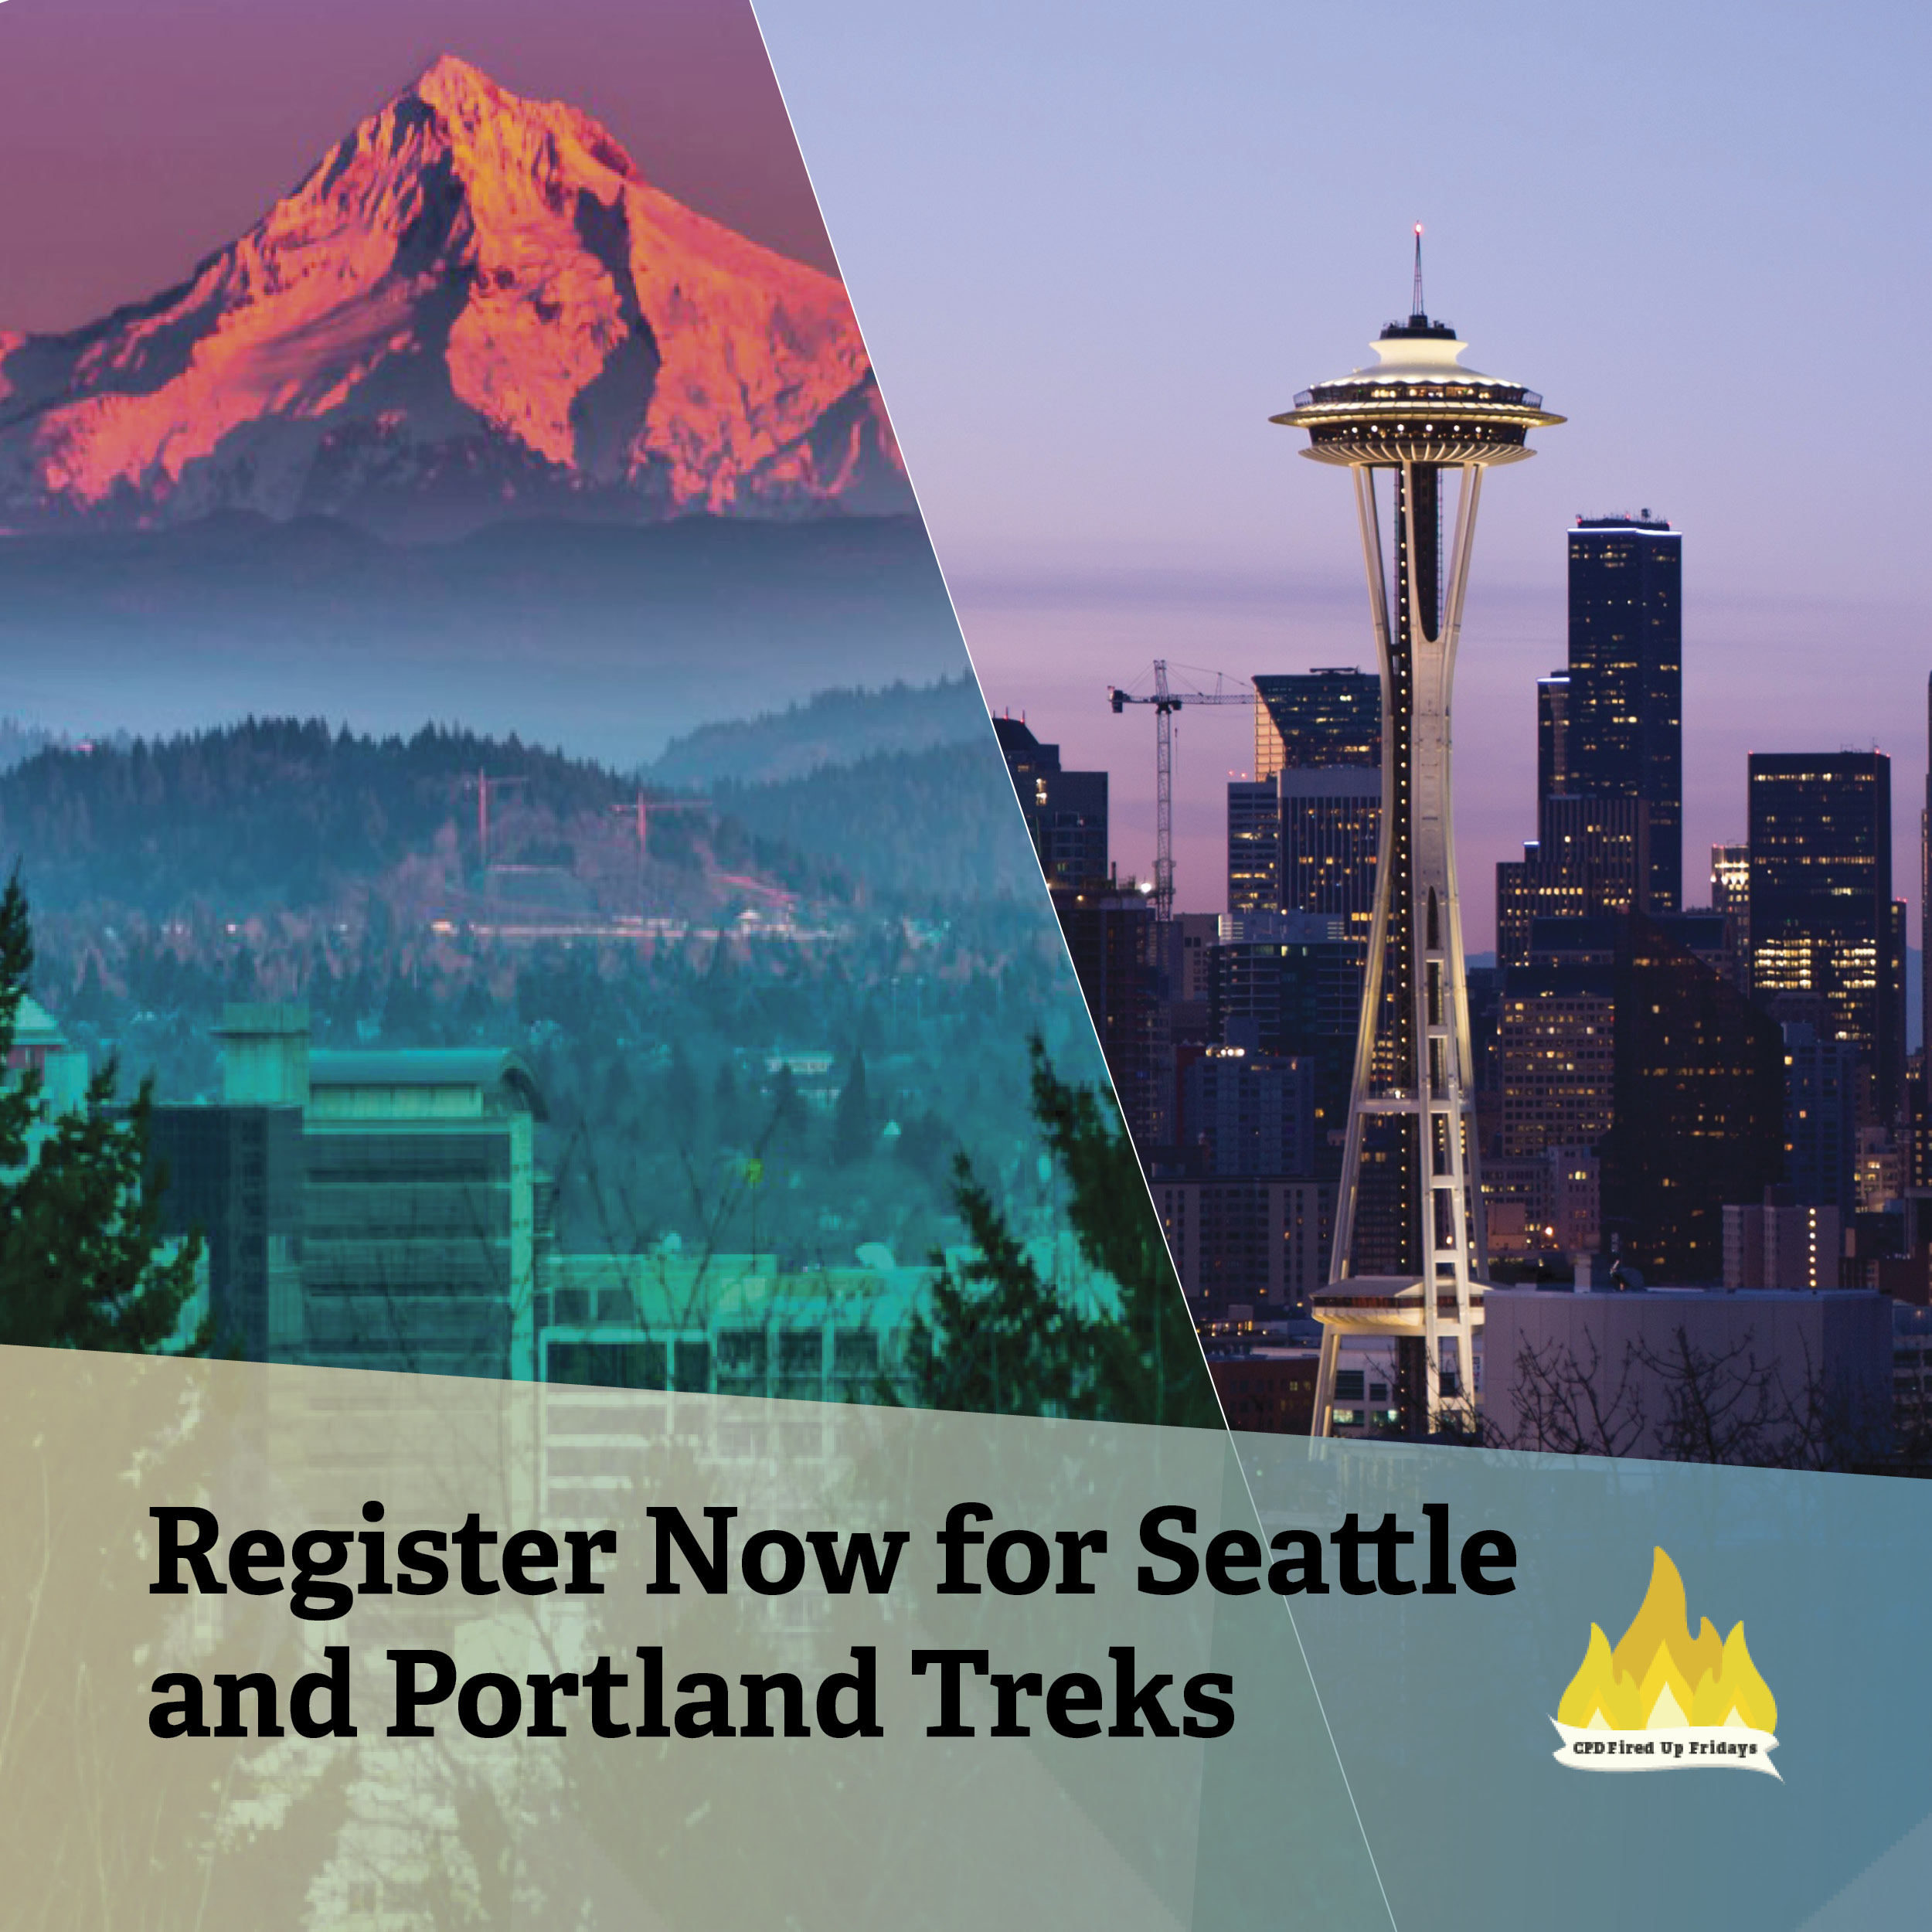 Two city scape photos are placed next to each other. On the right is the Seattle skyline, with the Space Needle prominent. On the left is the Portland cityscape, with Mount Hood prominent. Beneath, text reads: Register Now for Seattle and Portland Treks,